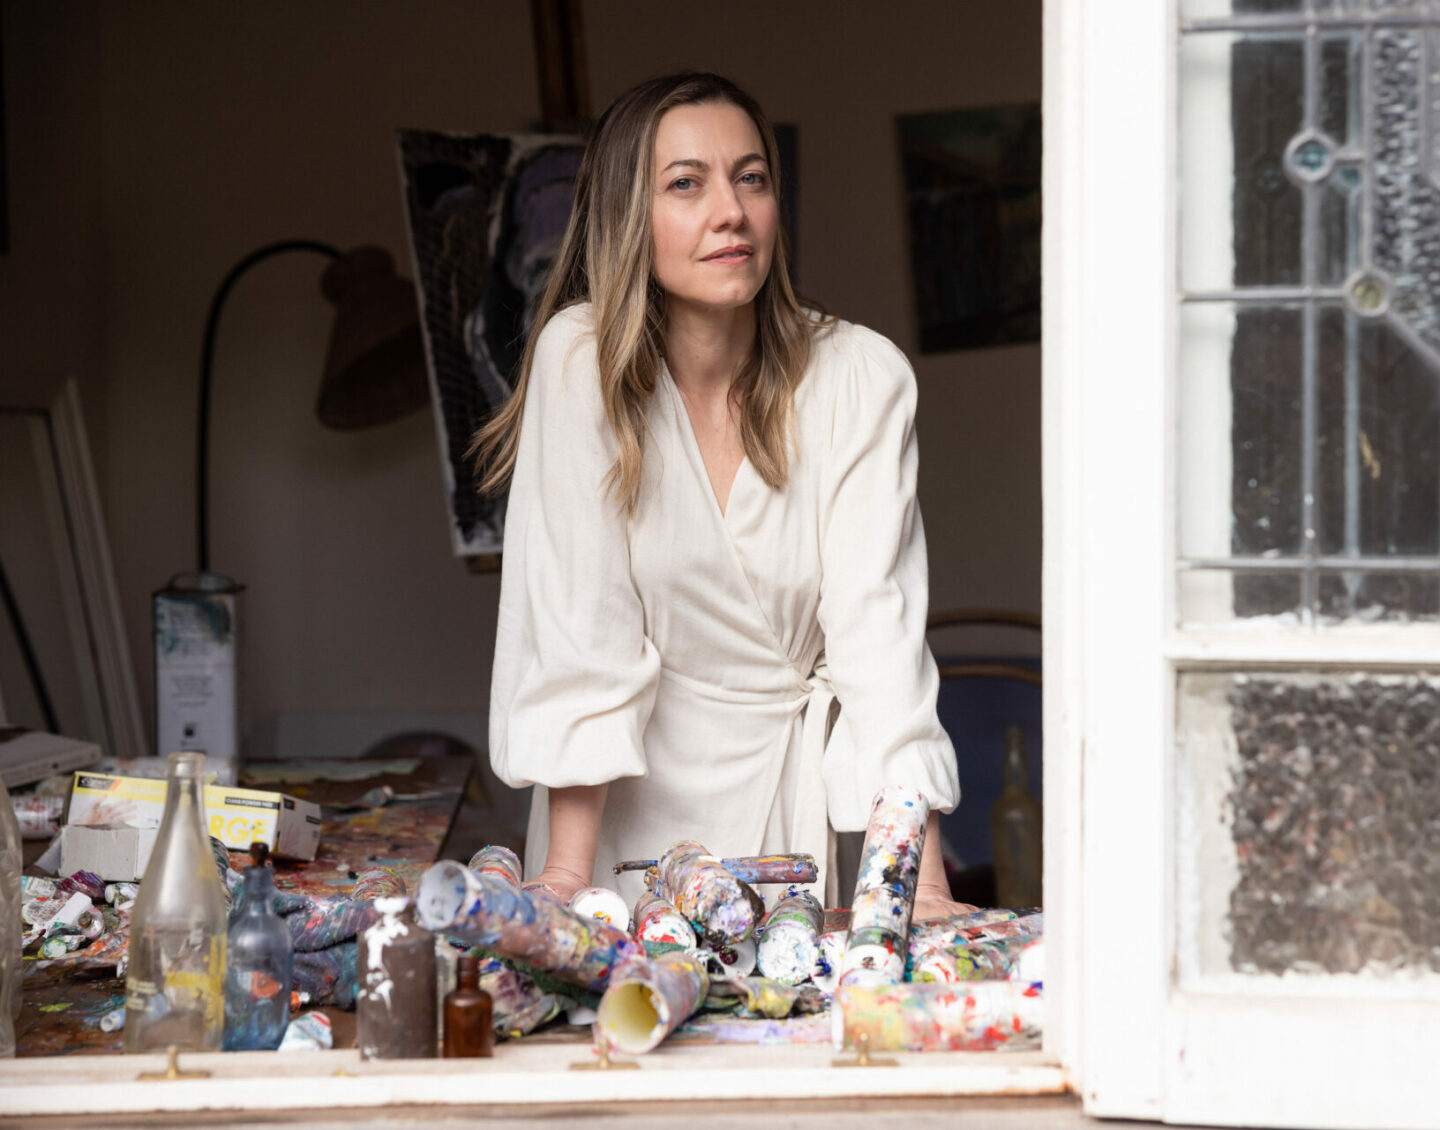 A white woman with long dark-blonde hair leans on a windowsill covered in art supplies